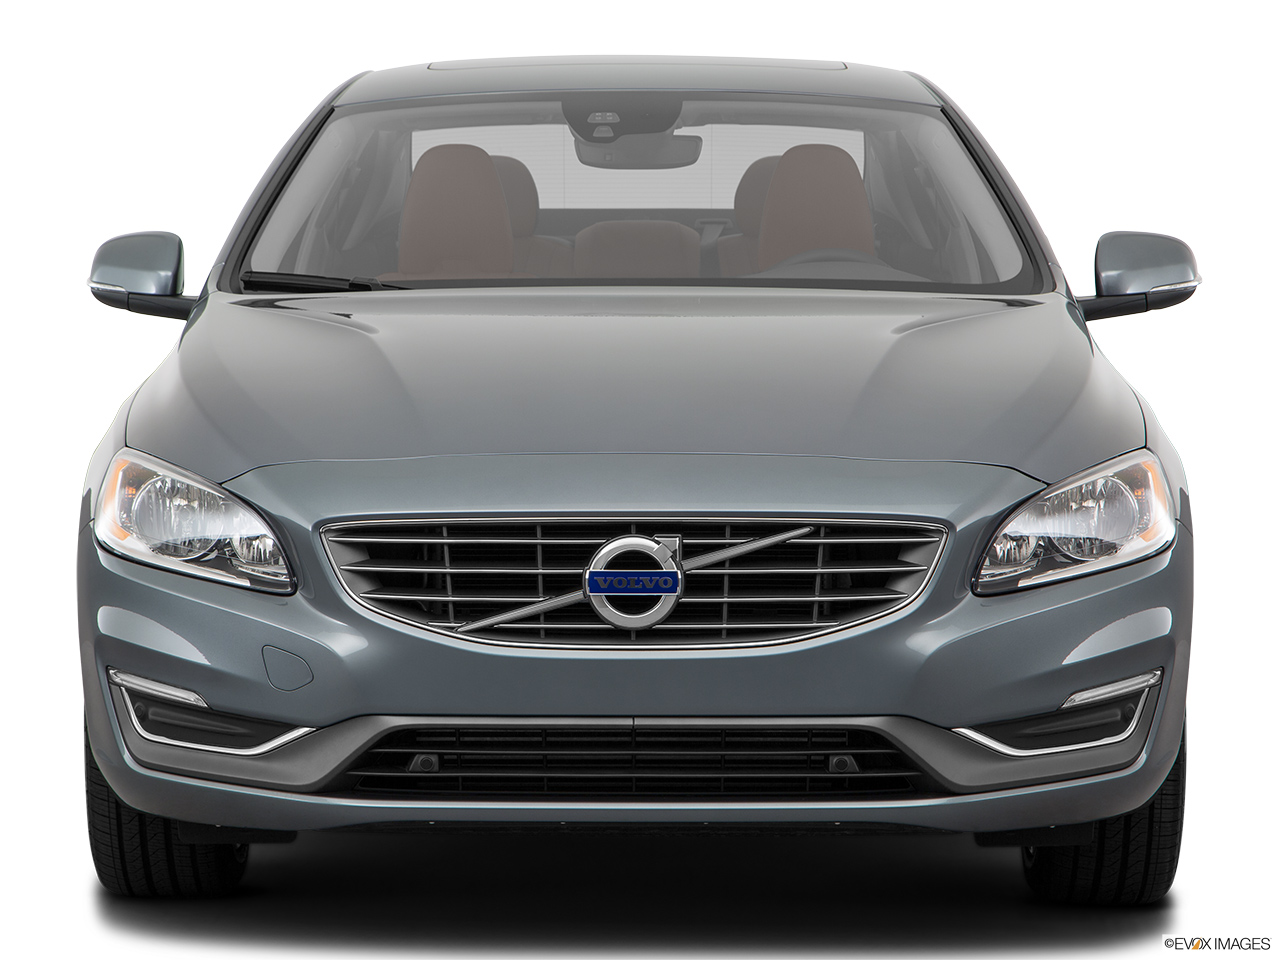 2017 Volvo S60 T5 Inscription Low/wide front. 